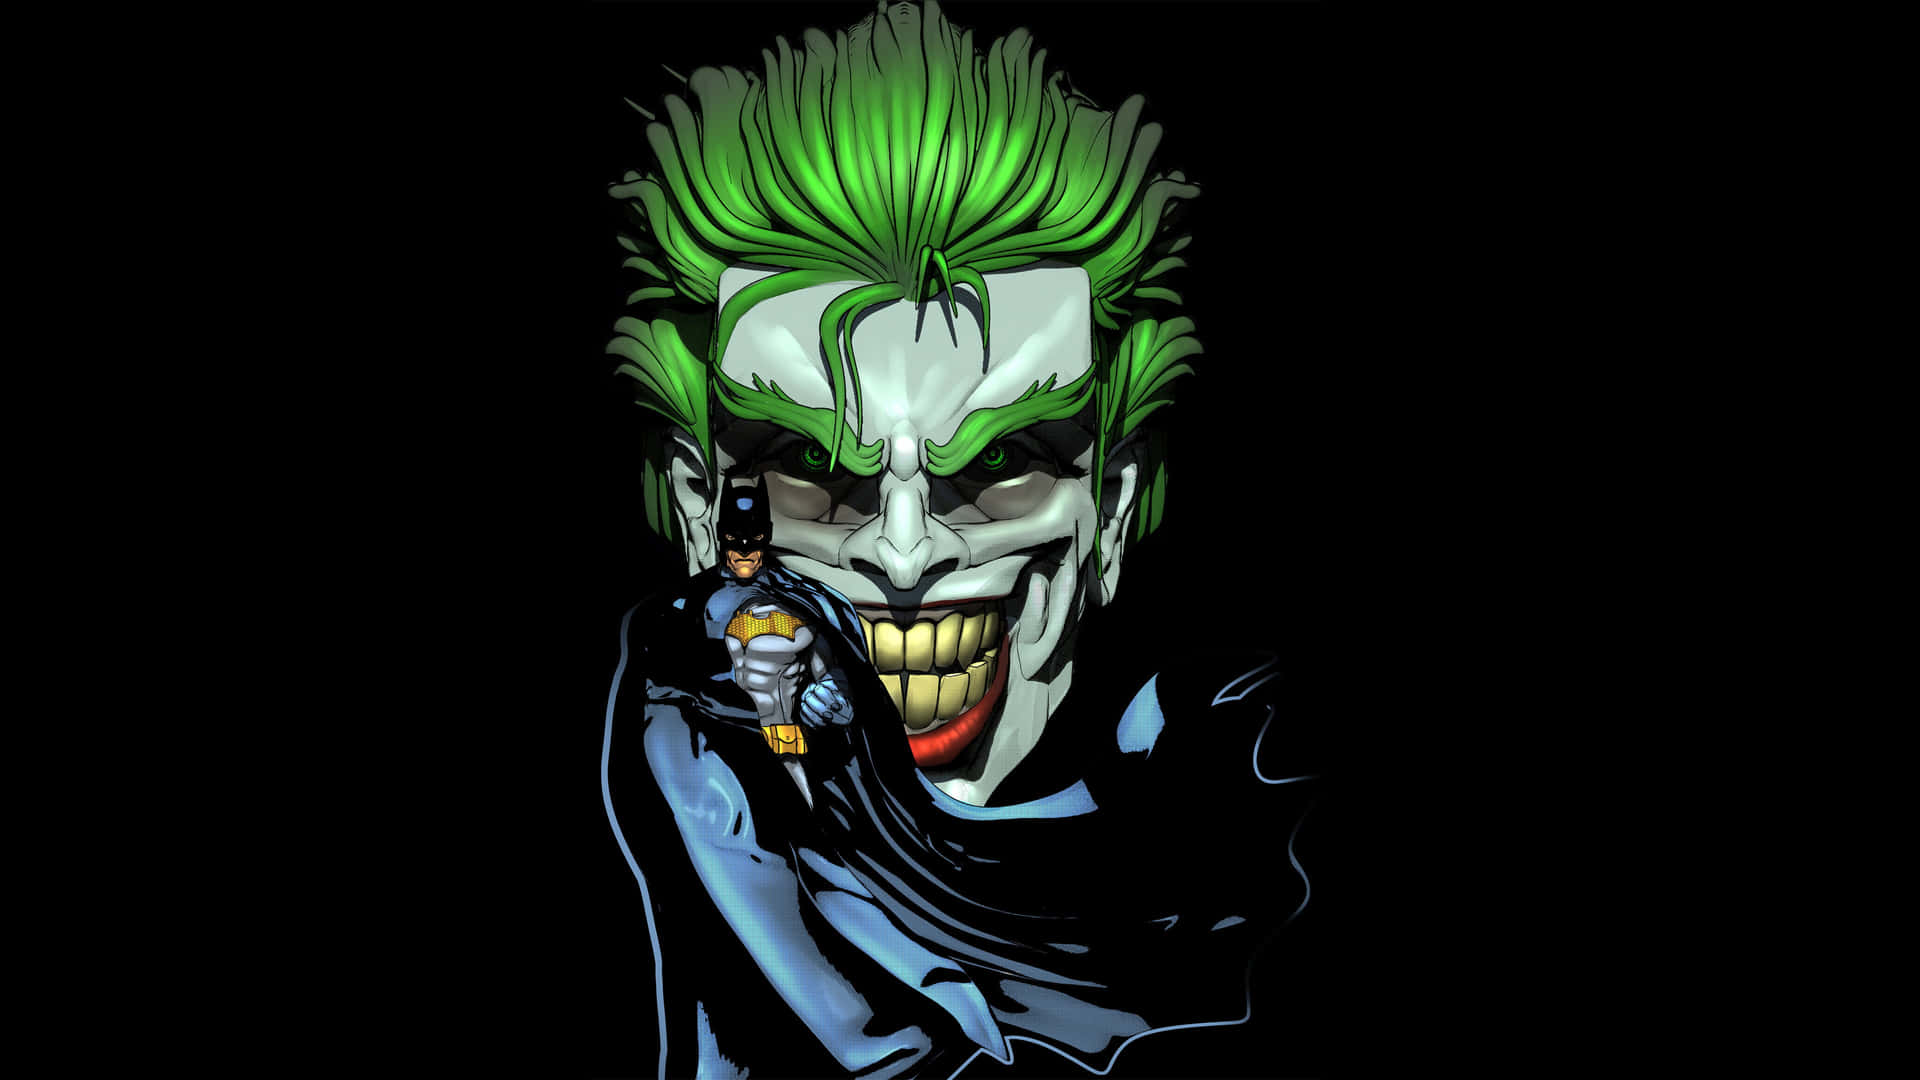 The Joker in a menacing pose with vivid colors in the backdrop Wallpaper